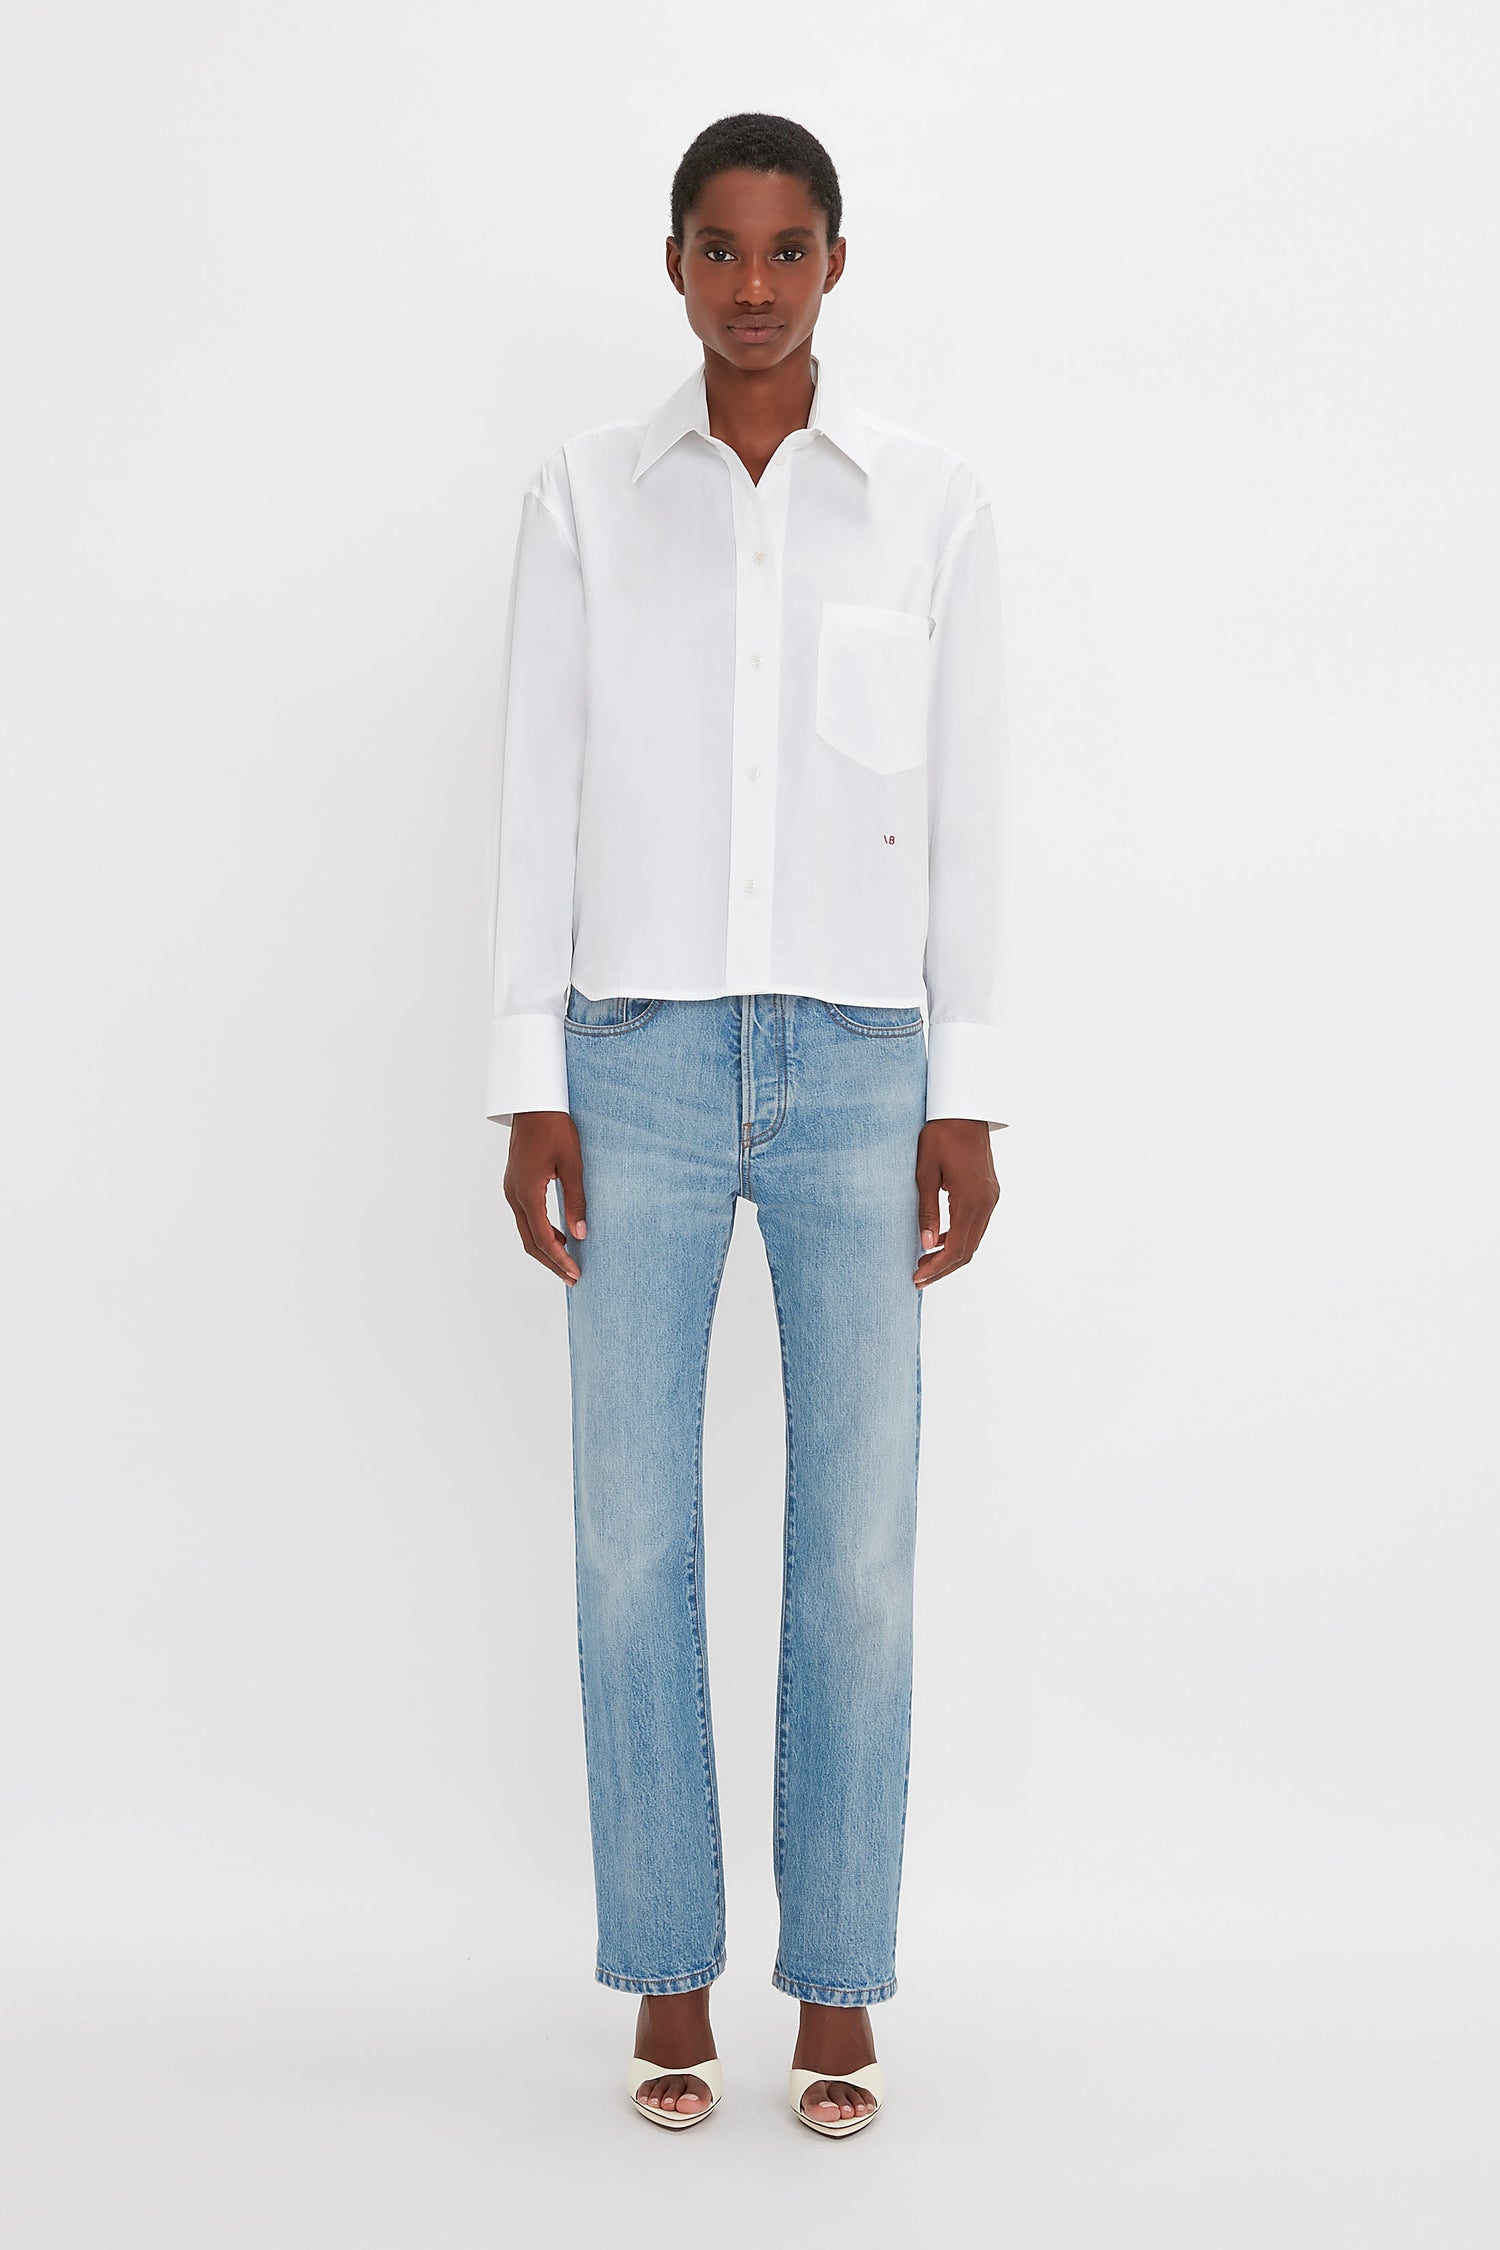 A black woman wearing a Victoria Beckham Cropped Long Sleeve Shirt in White and blue jeans, standing against a plain white background.